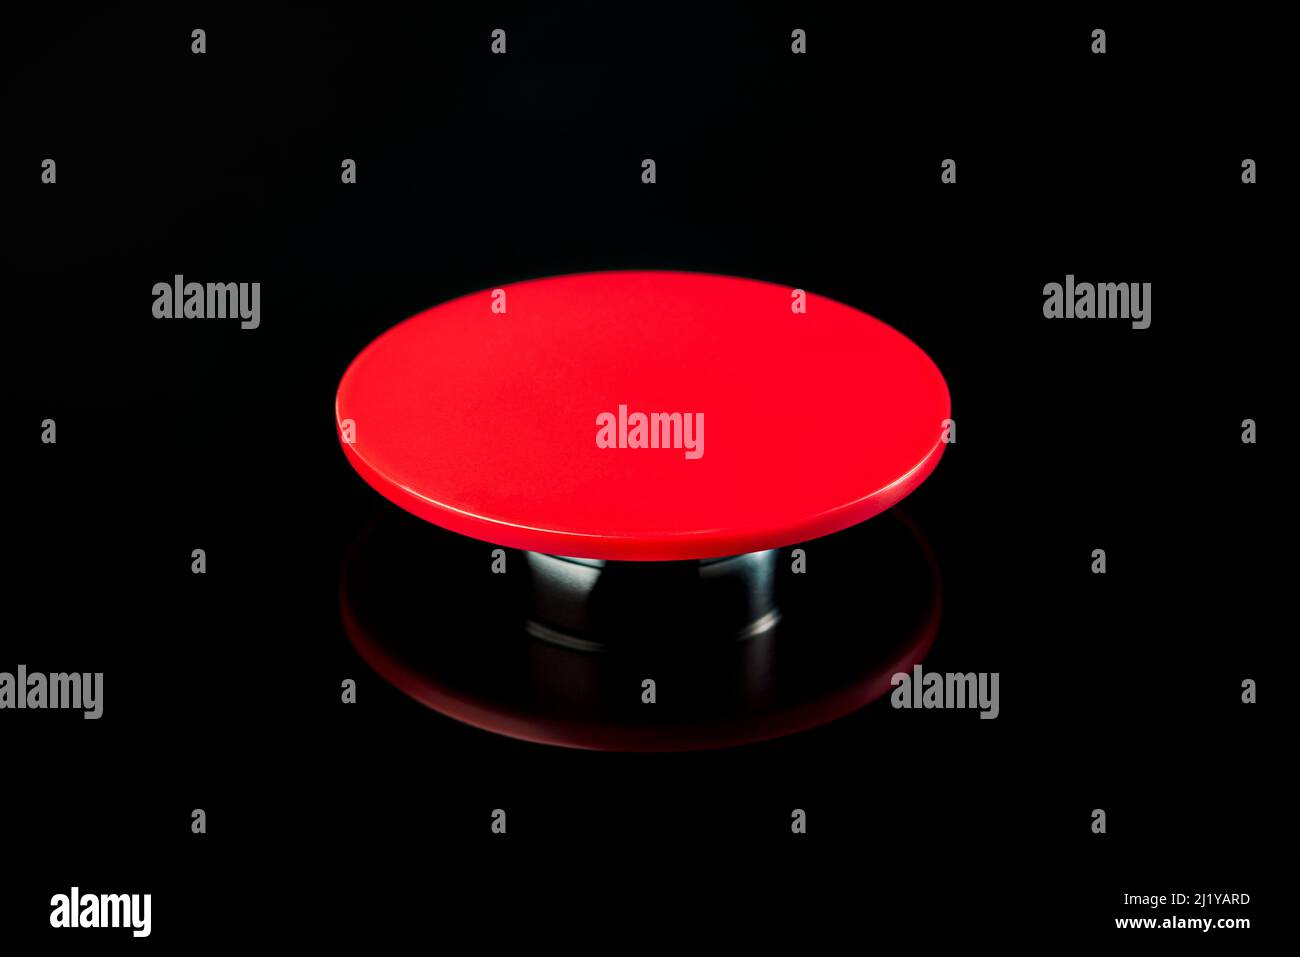 Big red button on a black background. The concept of the use of nuclear, biological or chemical weapons Stock Photo